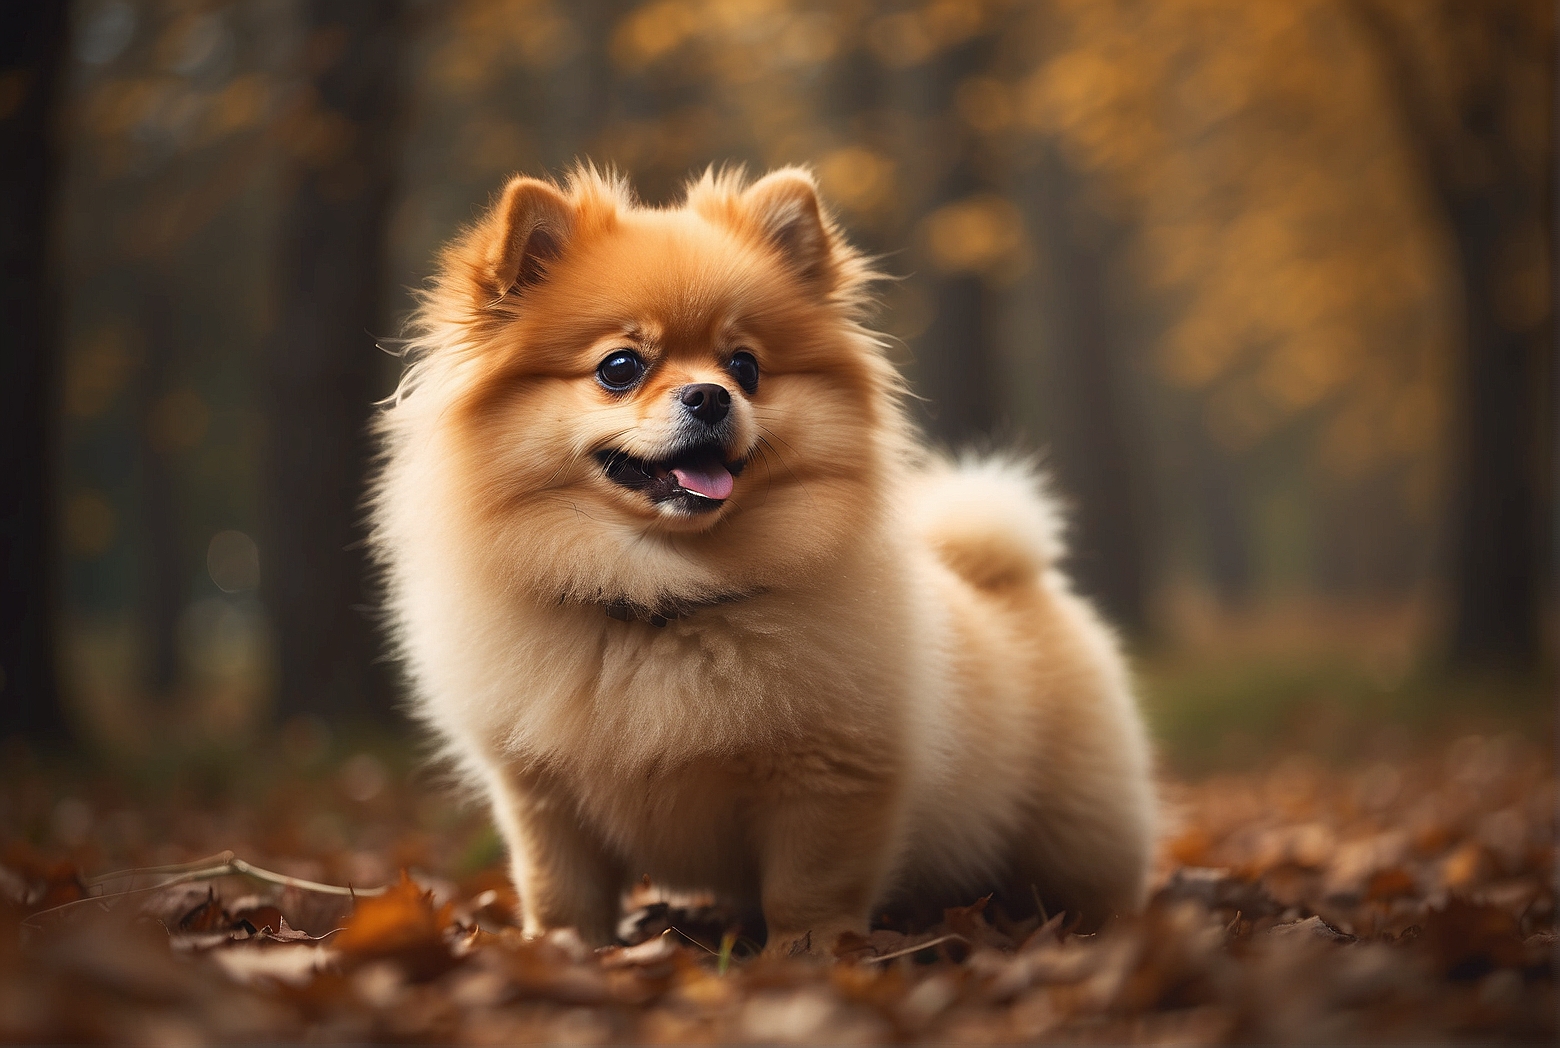 Will owning a Pomeranian lead to aggression towards its owner?